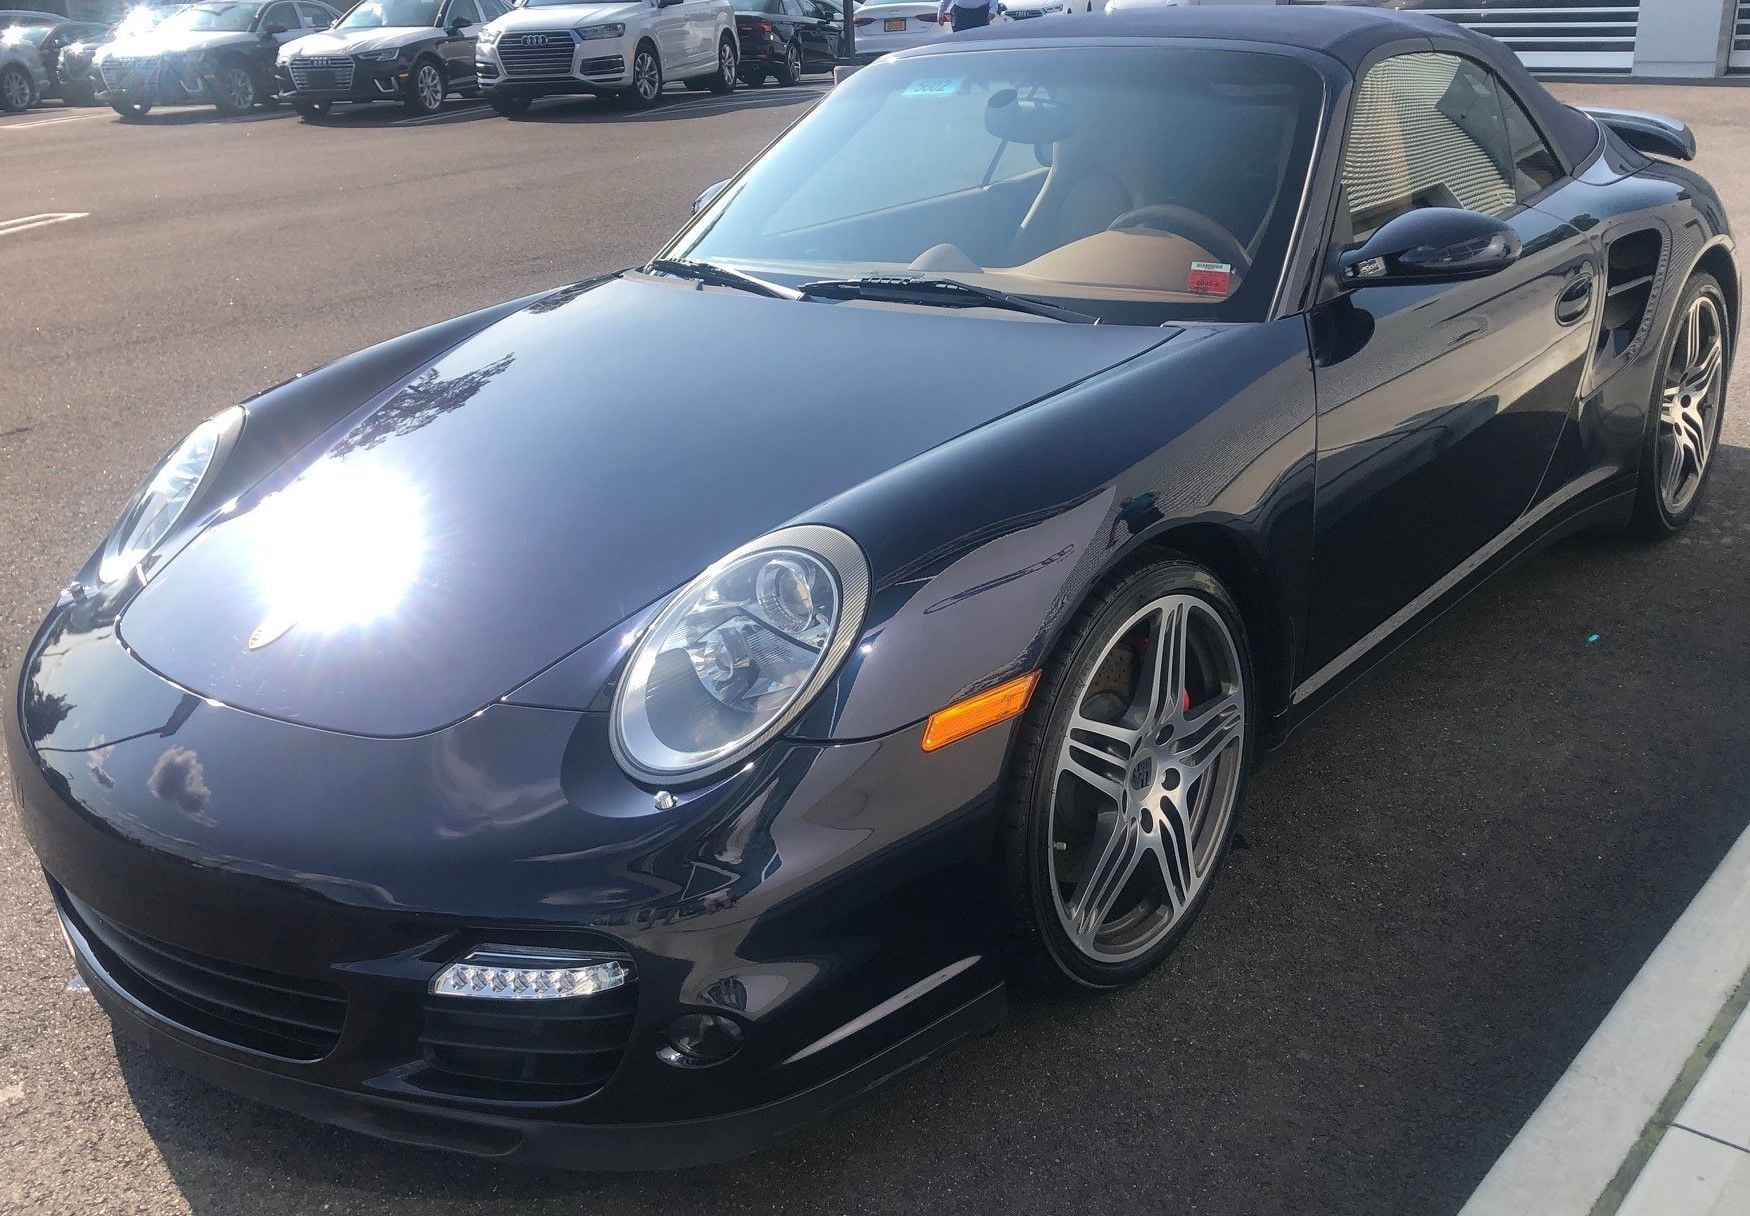 2009 Porsche 911 - 2009 911 Turbo Cab / Manual - Used - VIN WP0CD29969S773801 - 32,254 Miles - 6 cyl - AWD - Manual - Convertible - Blue - Roslyn Heights, NY 11577, United States